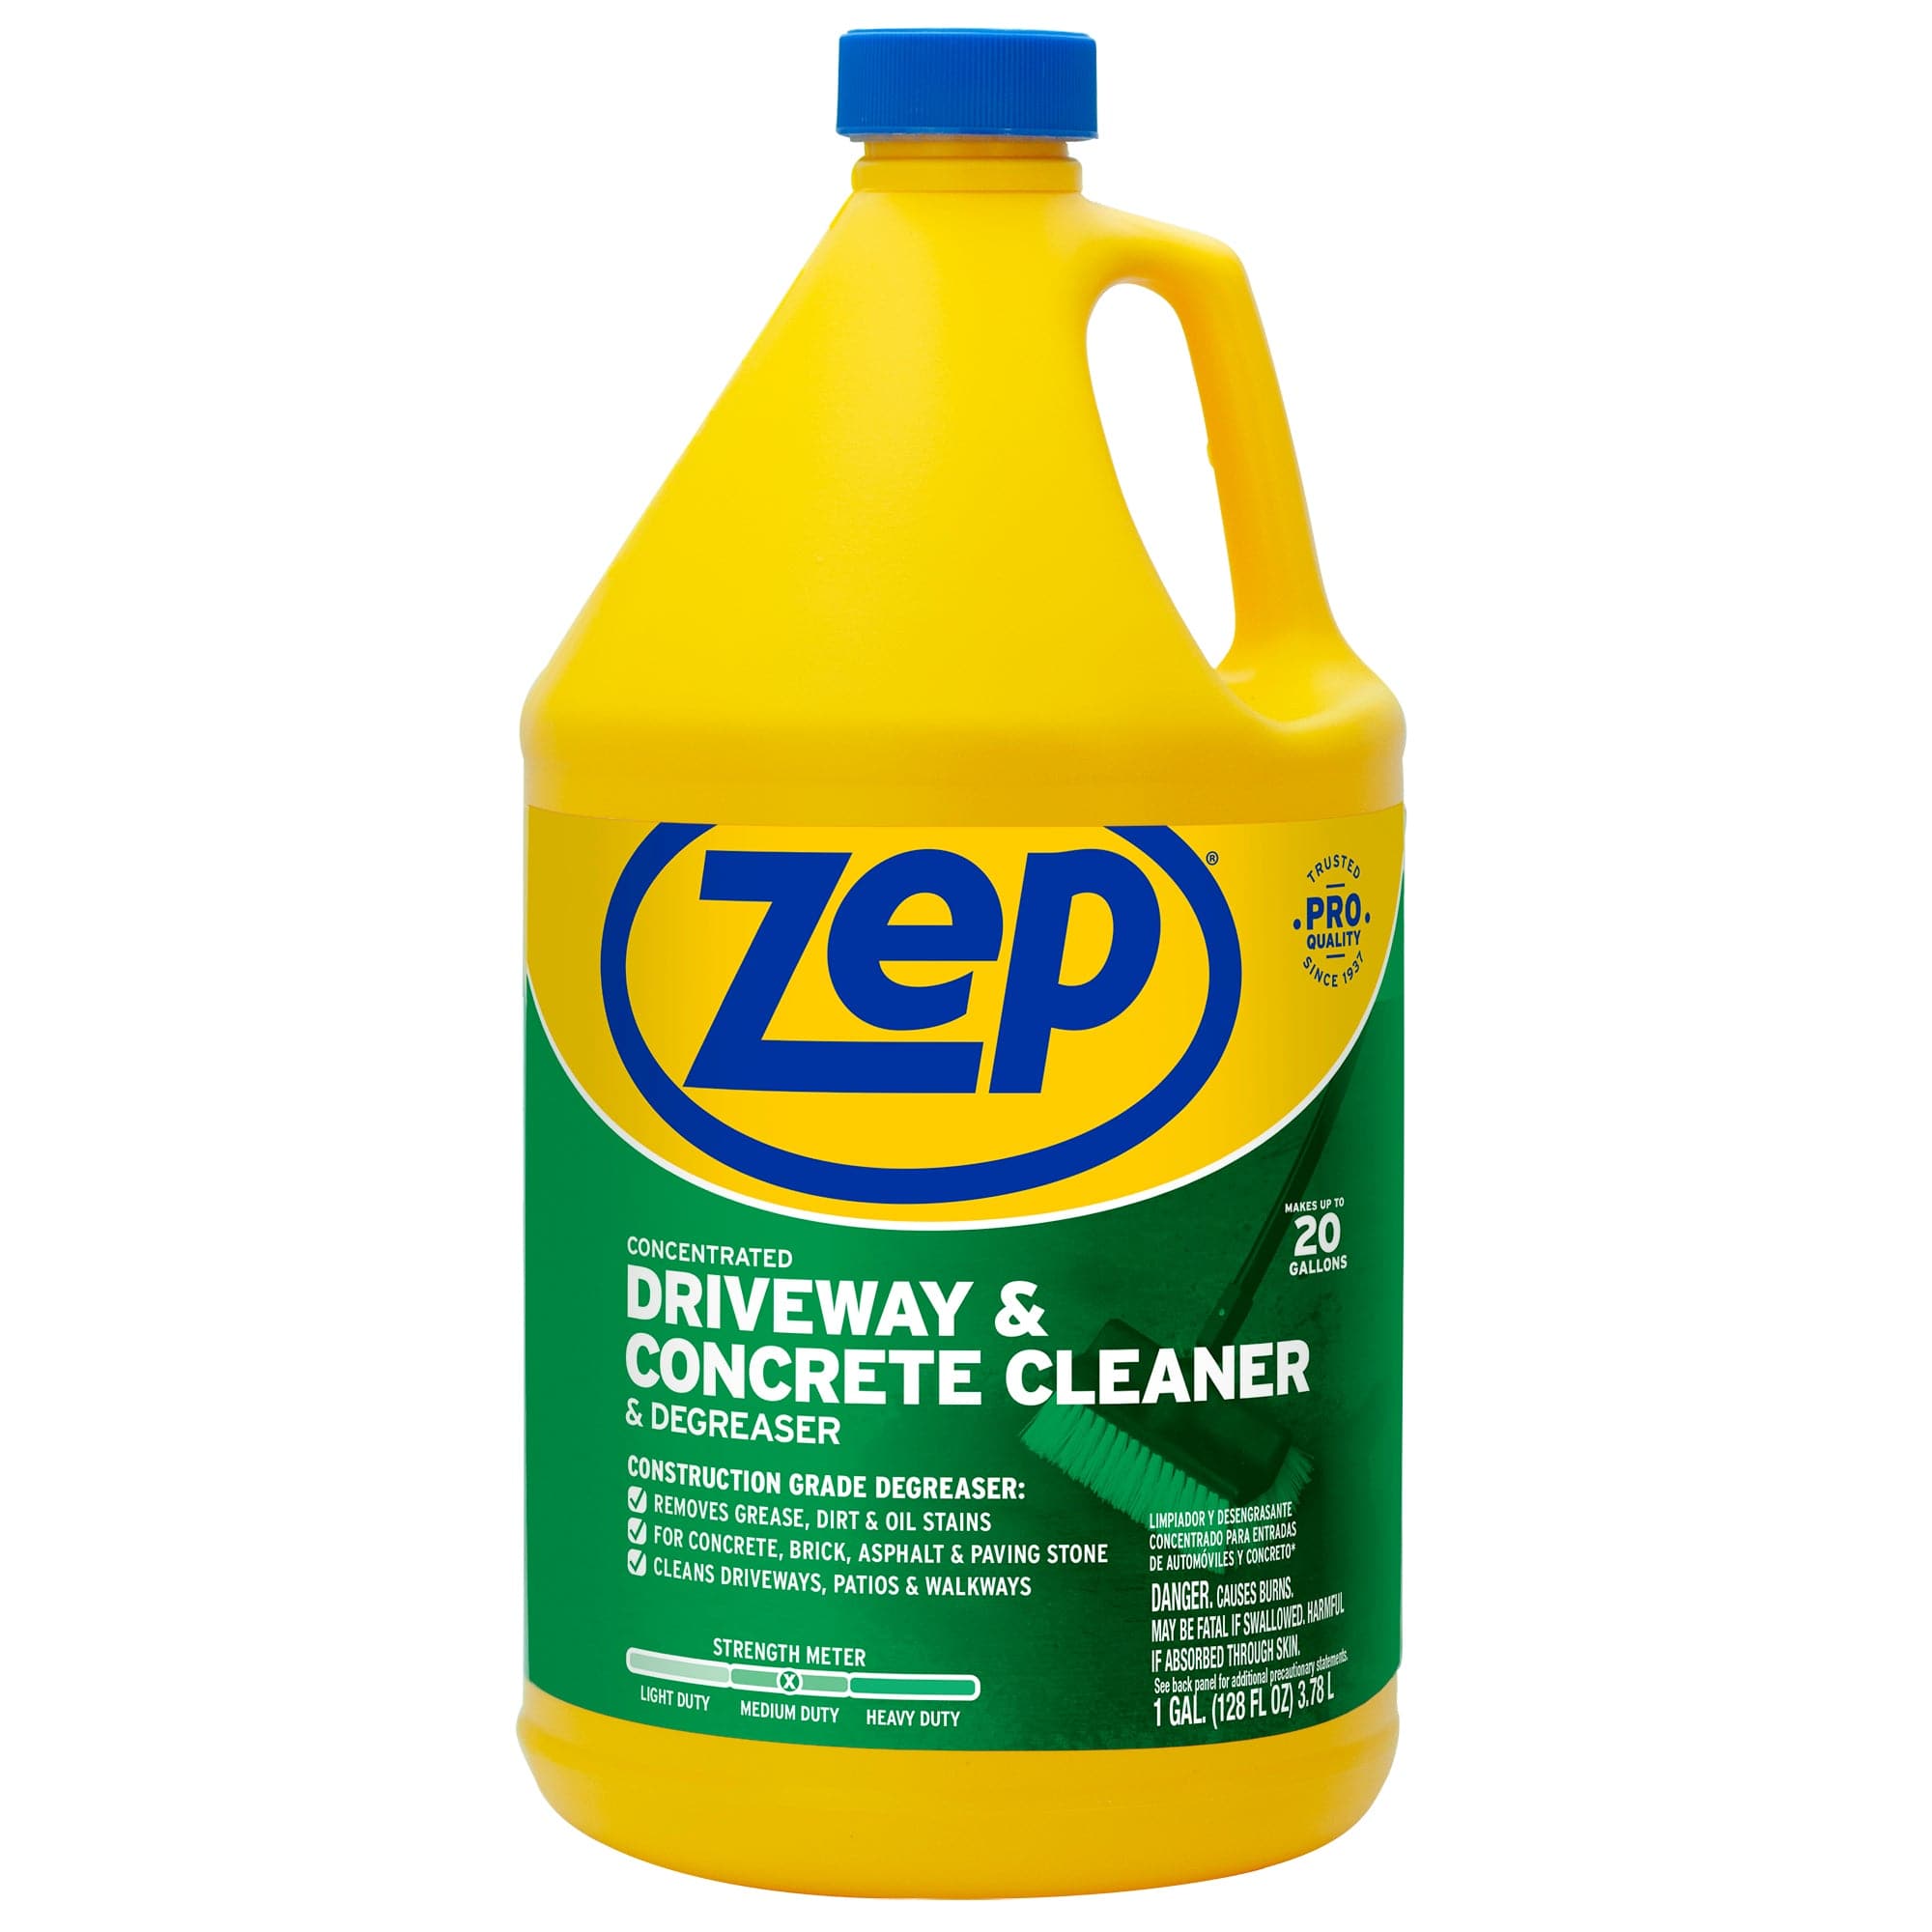 20 Best Cleaning Products, According to Professional Cleaners